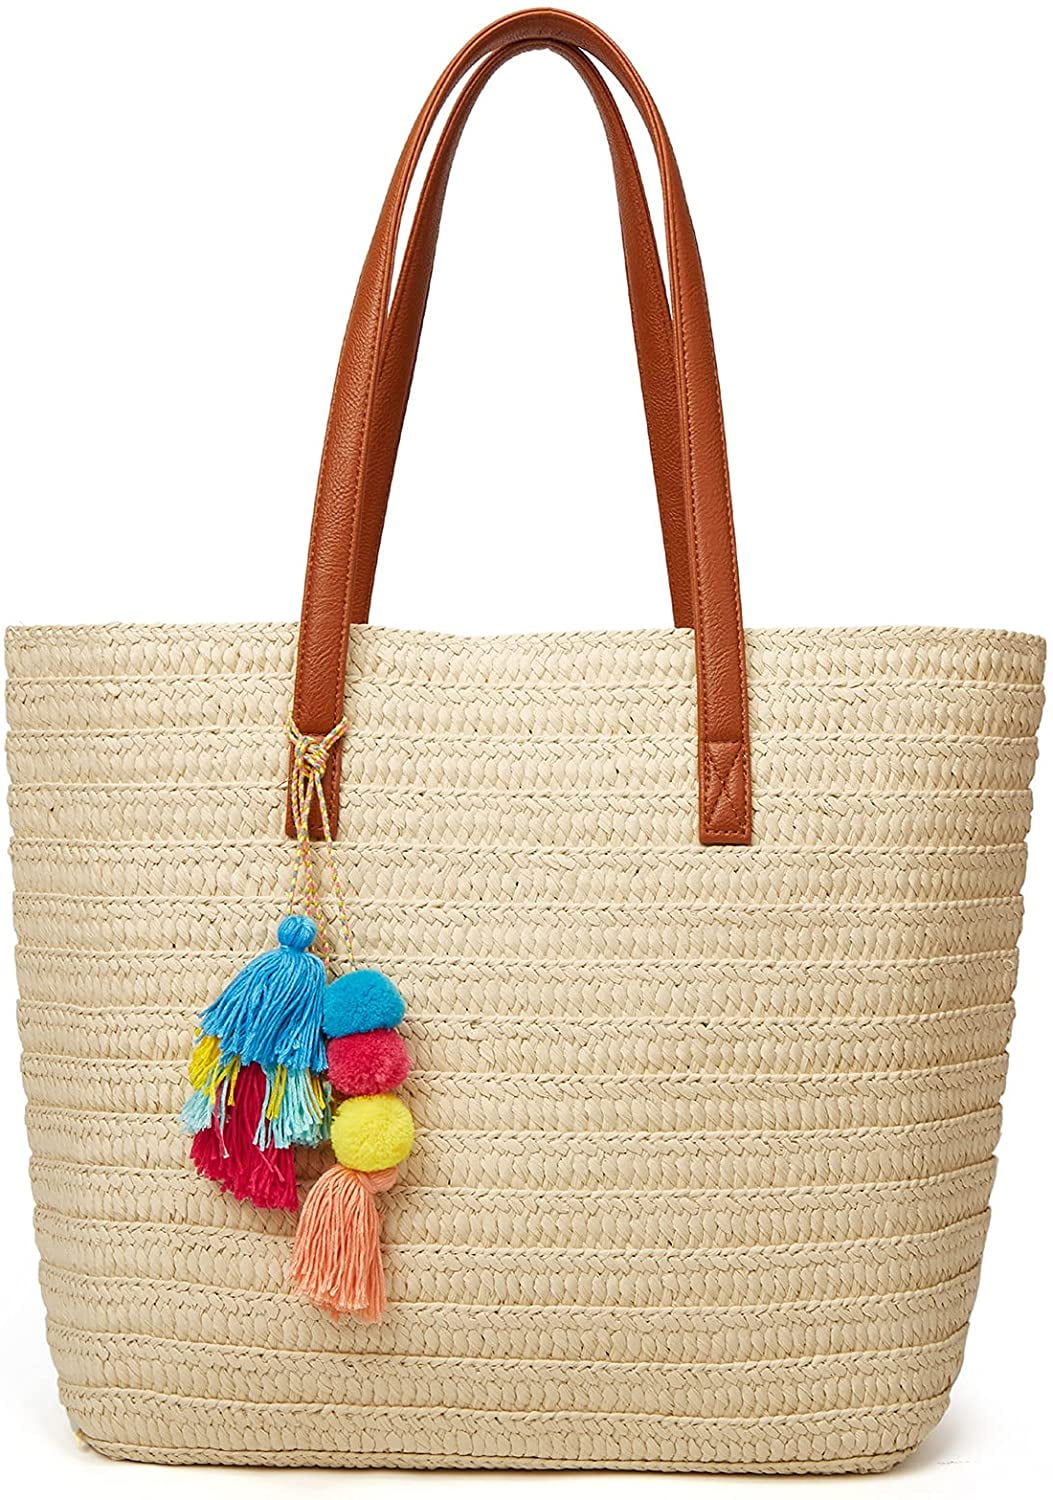 Epsion Straw Beach Bags Tote Tassels Bag Hobo Summer Handwoven Shoulder  Bags Purse With Pom Poms : Clothing, Shoes & Jewelry - Amazon.com